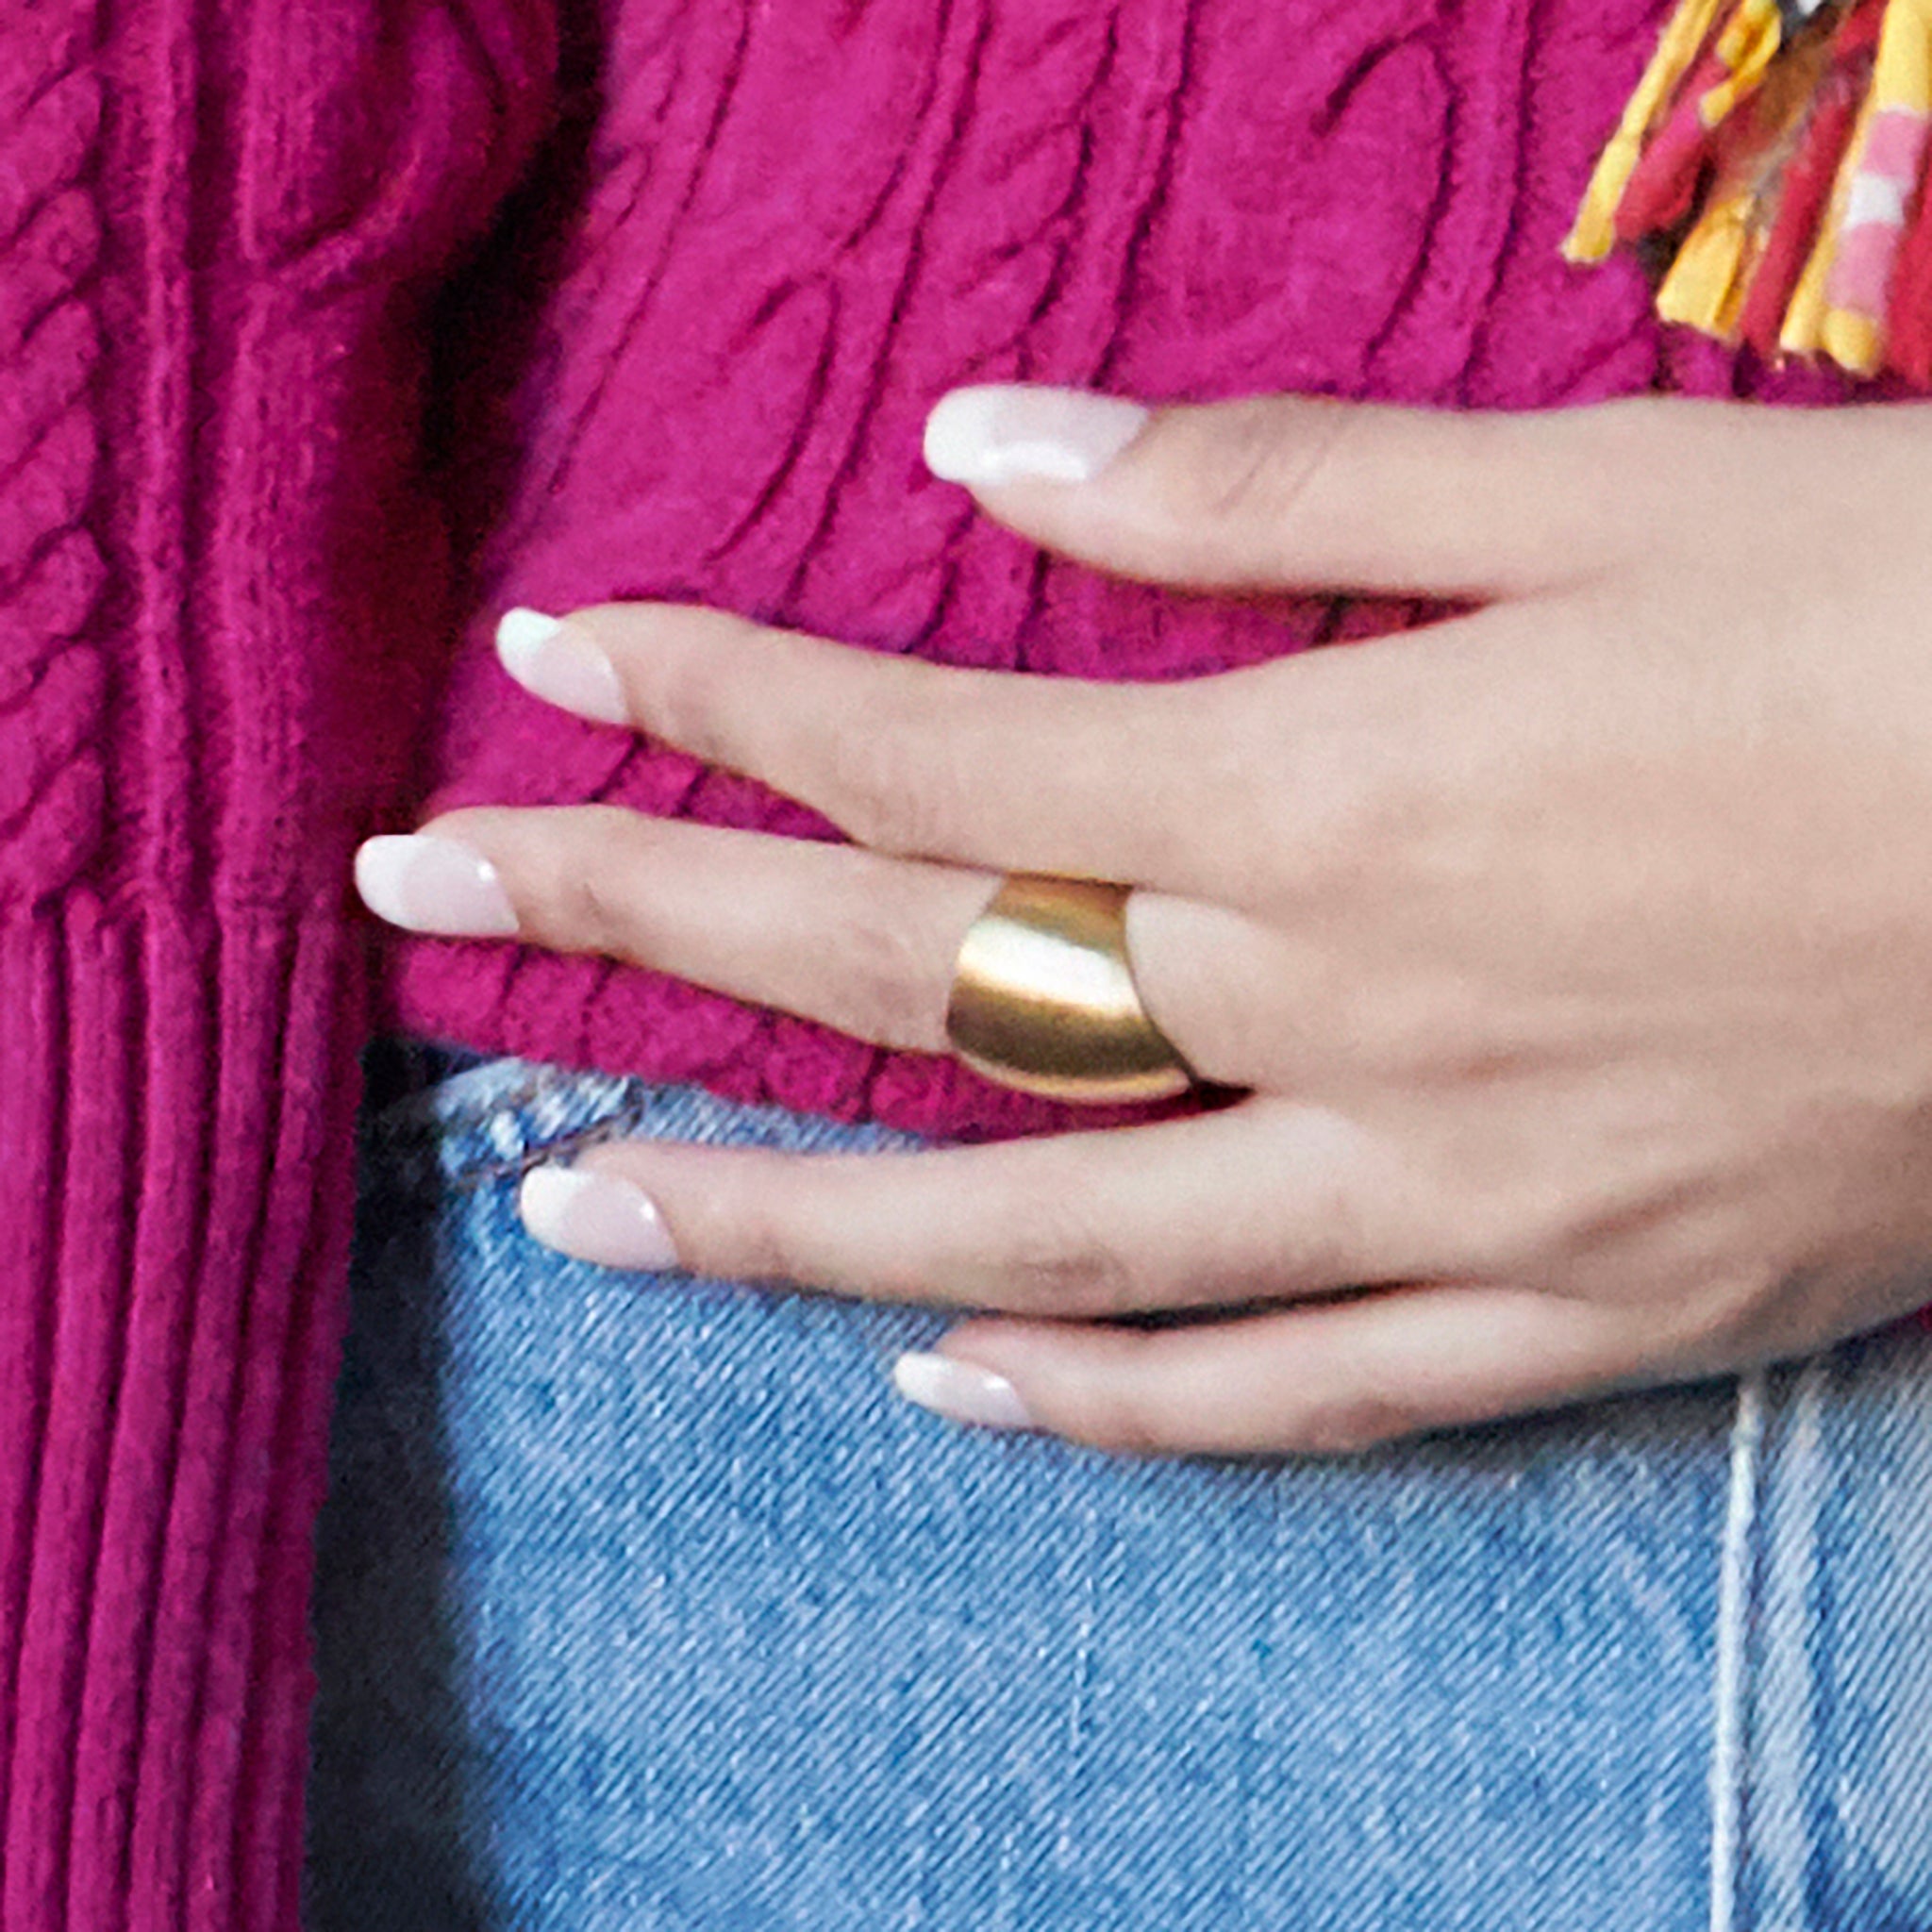 A woman's hand is shown with a single gold ring.